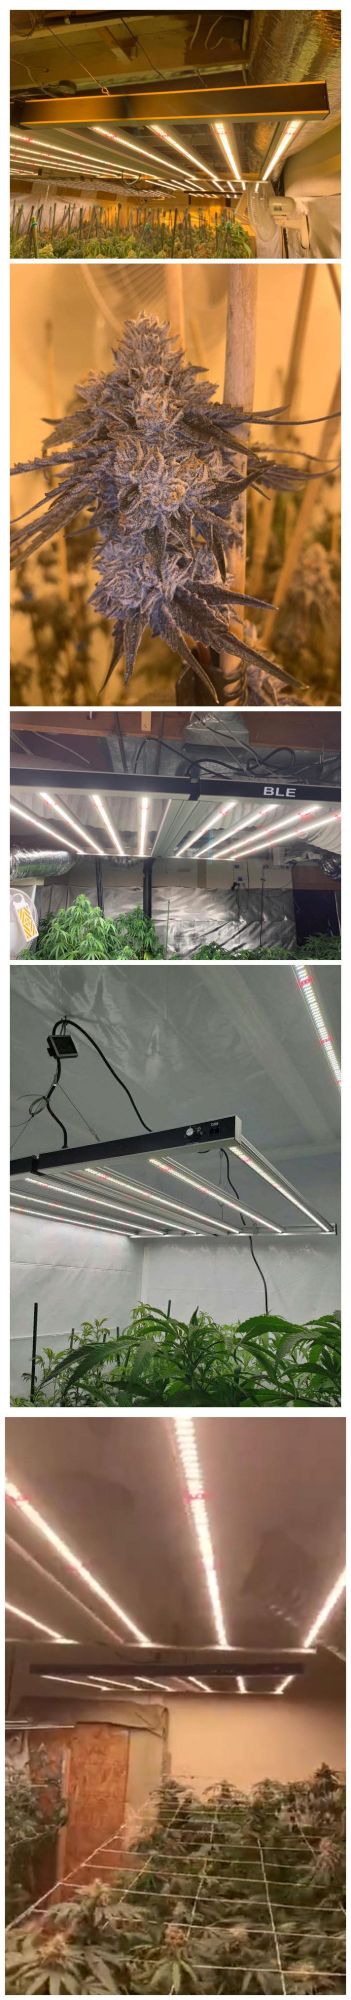 880W Samsung Lm301b Horticulture Greenhouse Full Spectrum Grow LED Light